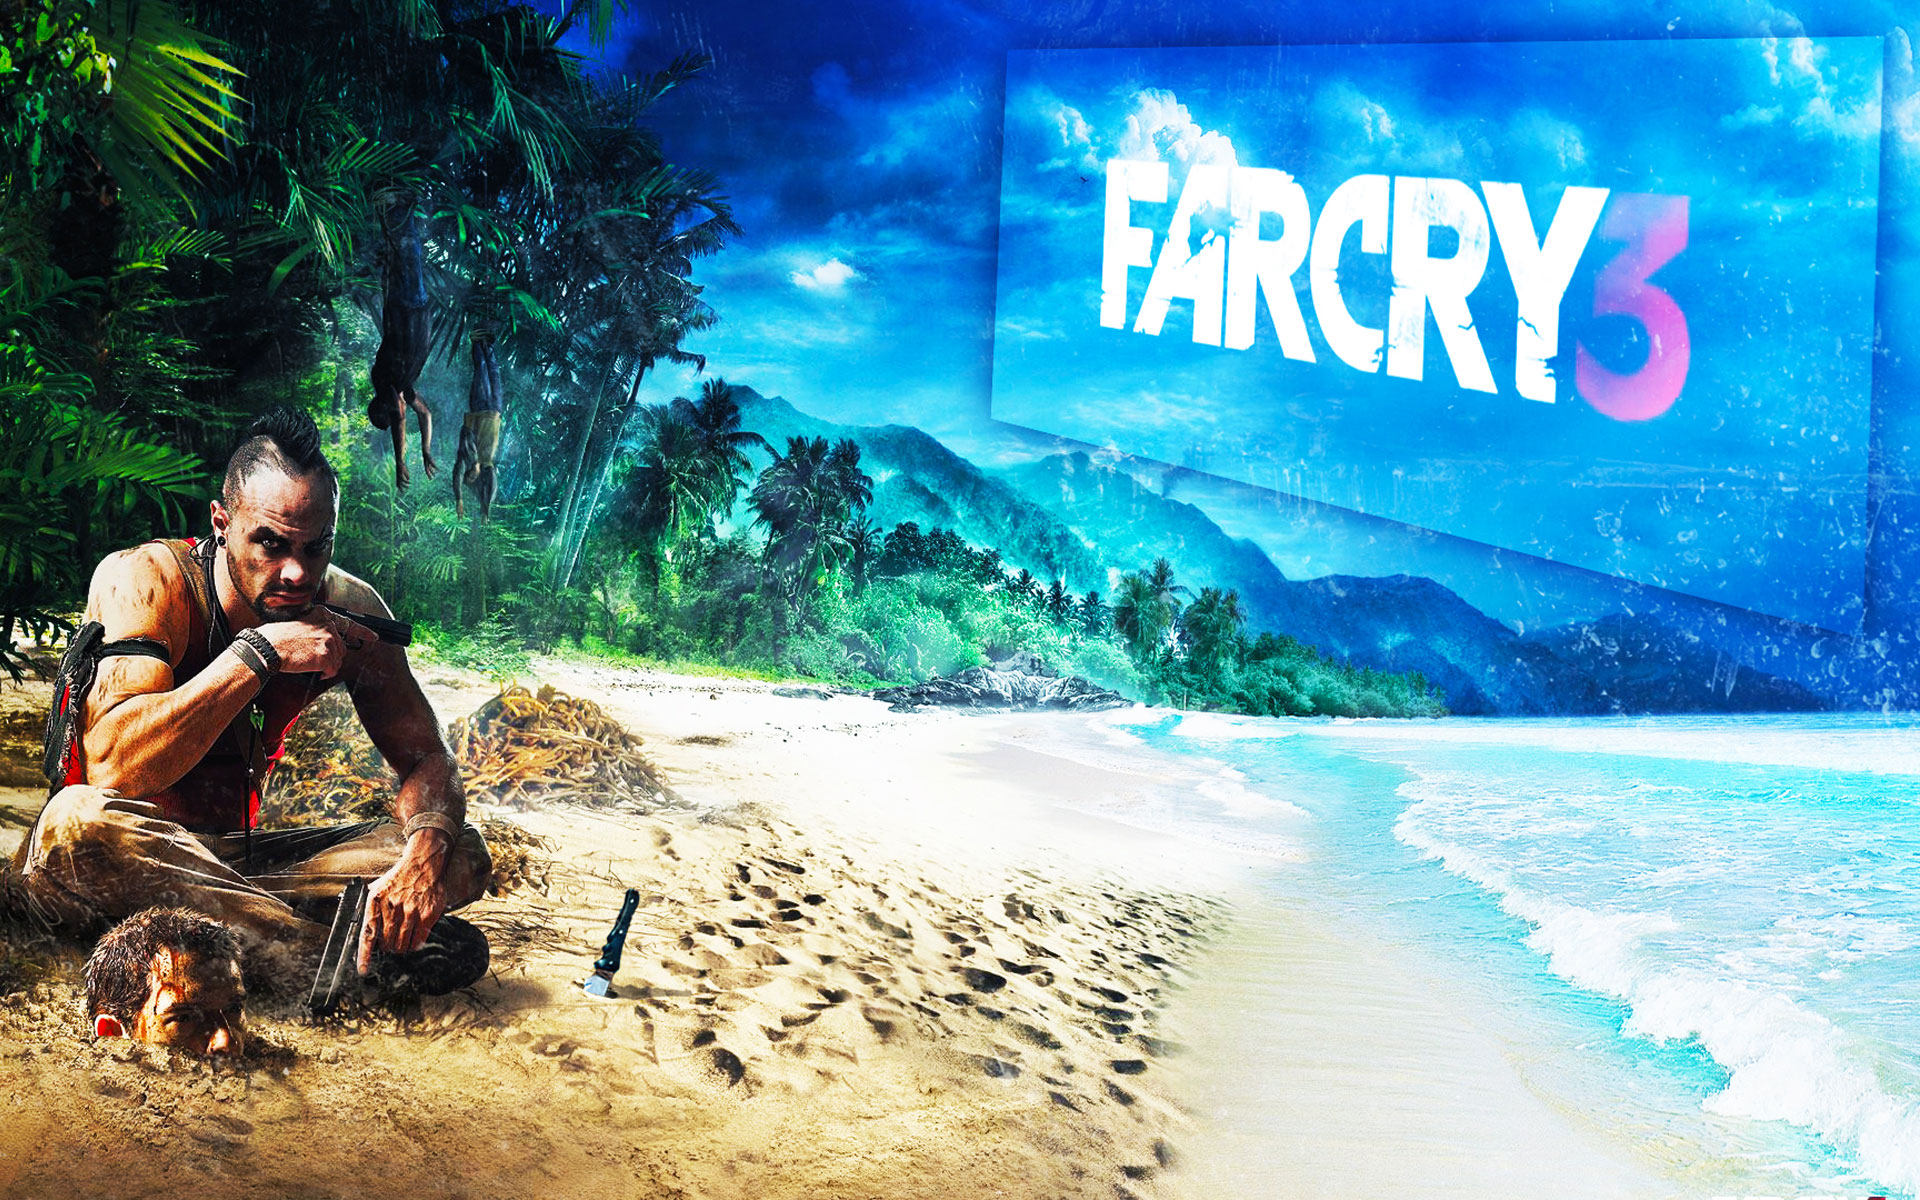 Far Cry 3 FREE DOWNLOAD CRACKED-GAMESORG